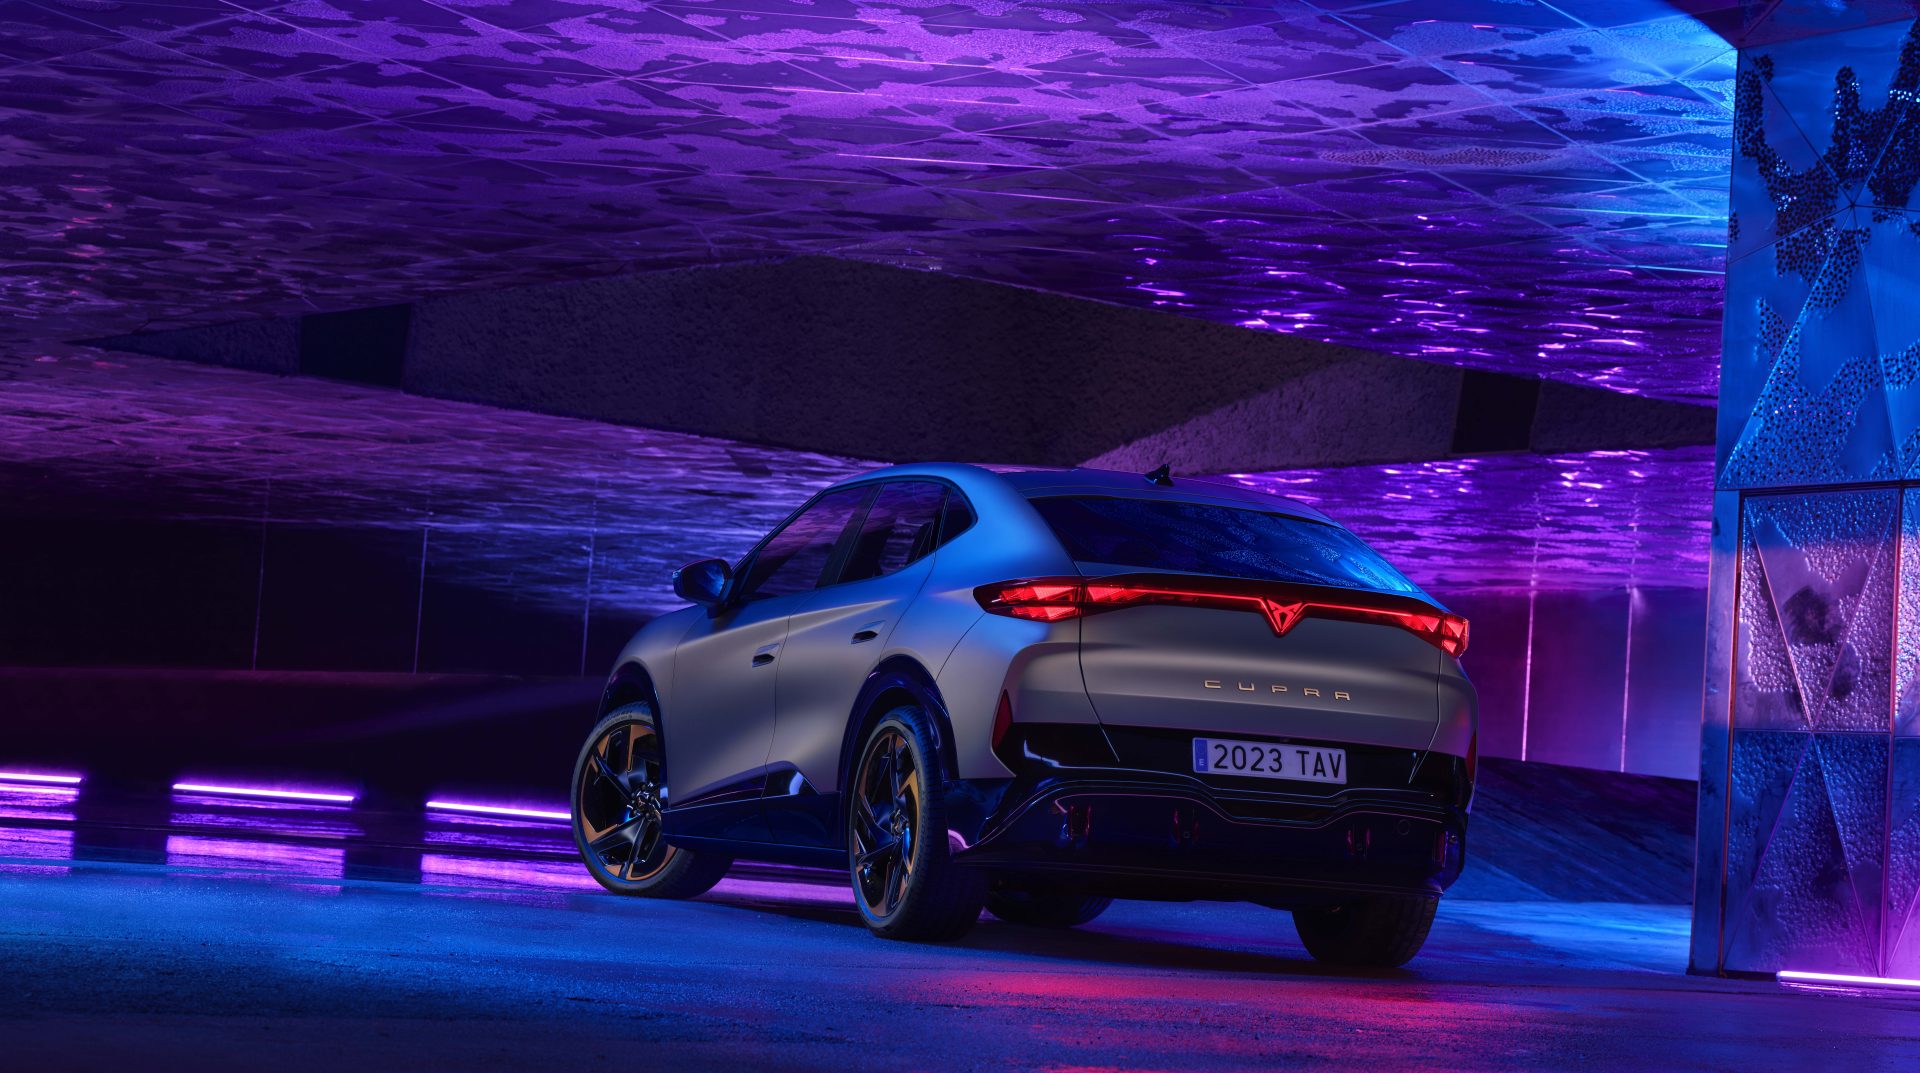 CUPRA Tavascan 02 HQ CUPRA Tavascan: “We pushed the boundaries without thinking about what people might say”